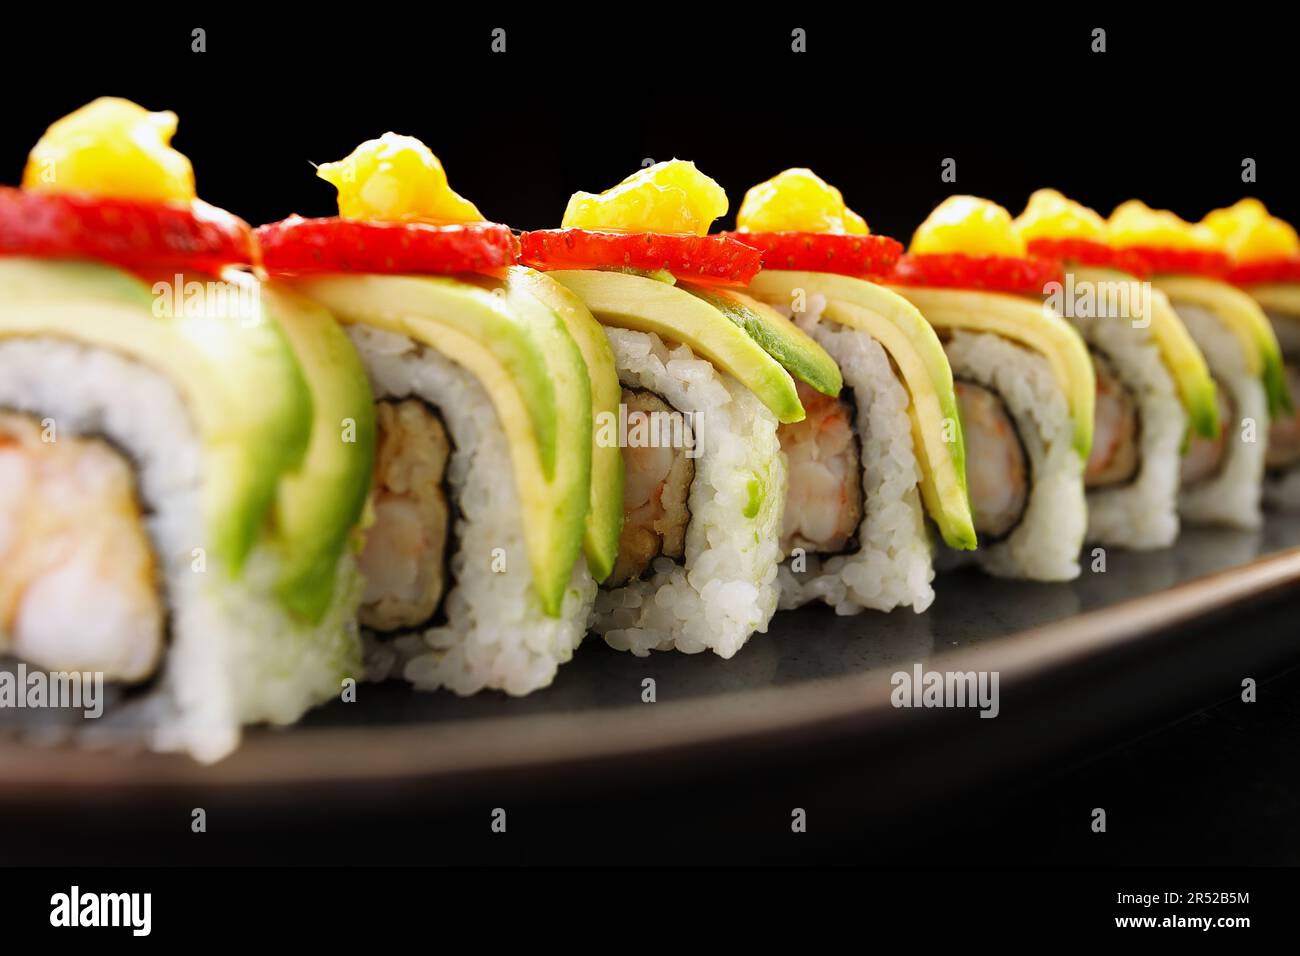 sushi delight with creamy avocado, succulent shrimp, and juicy strawberry Stock Photo